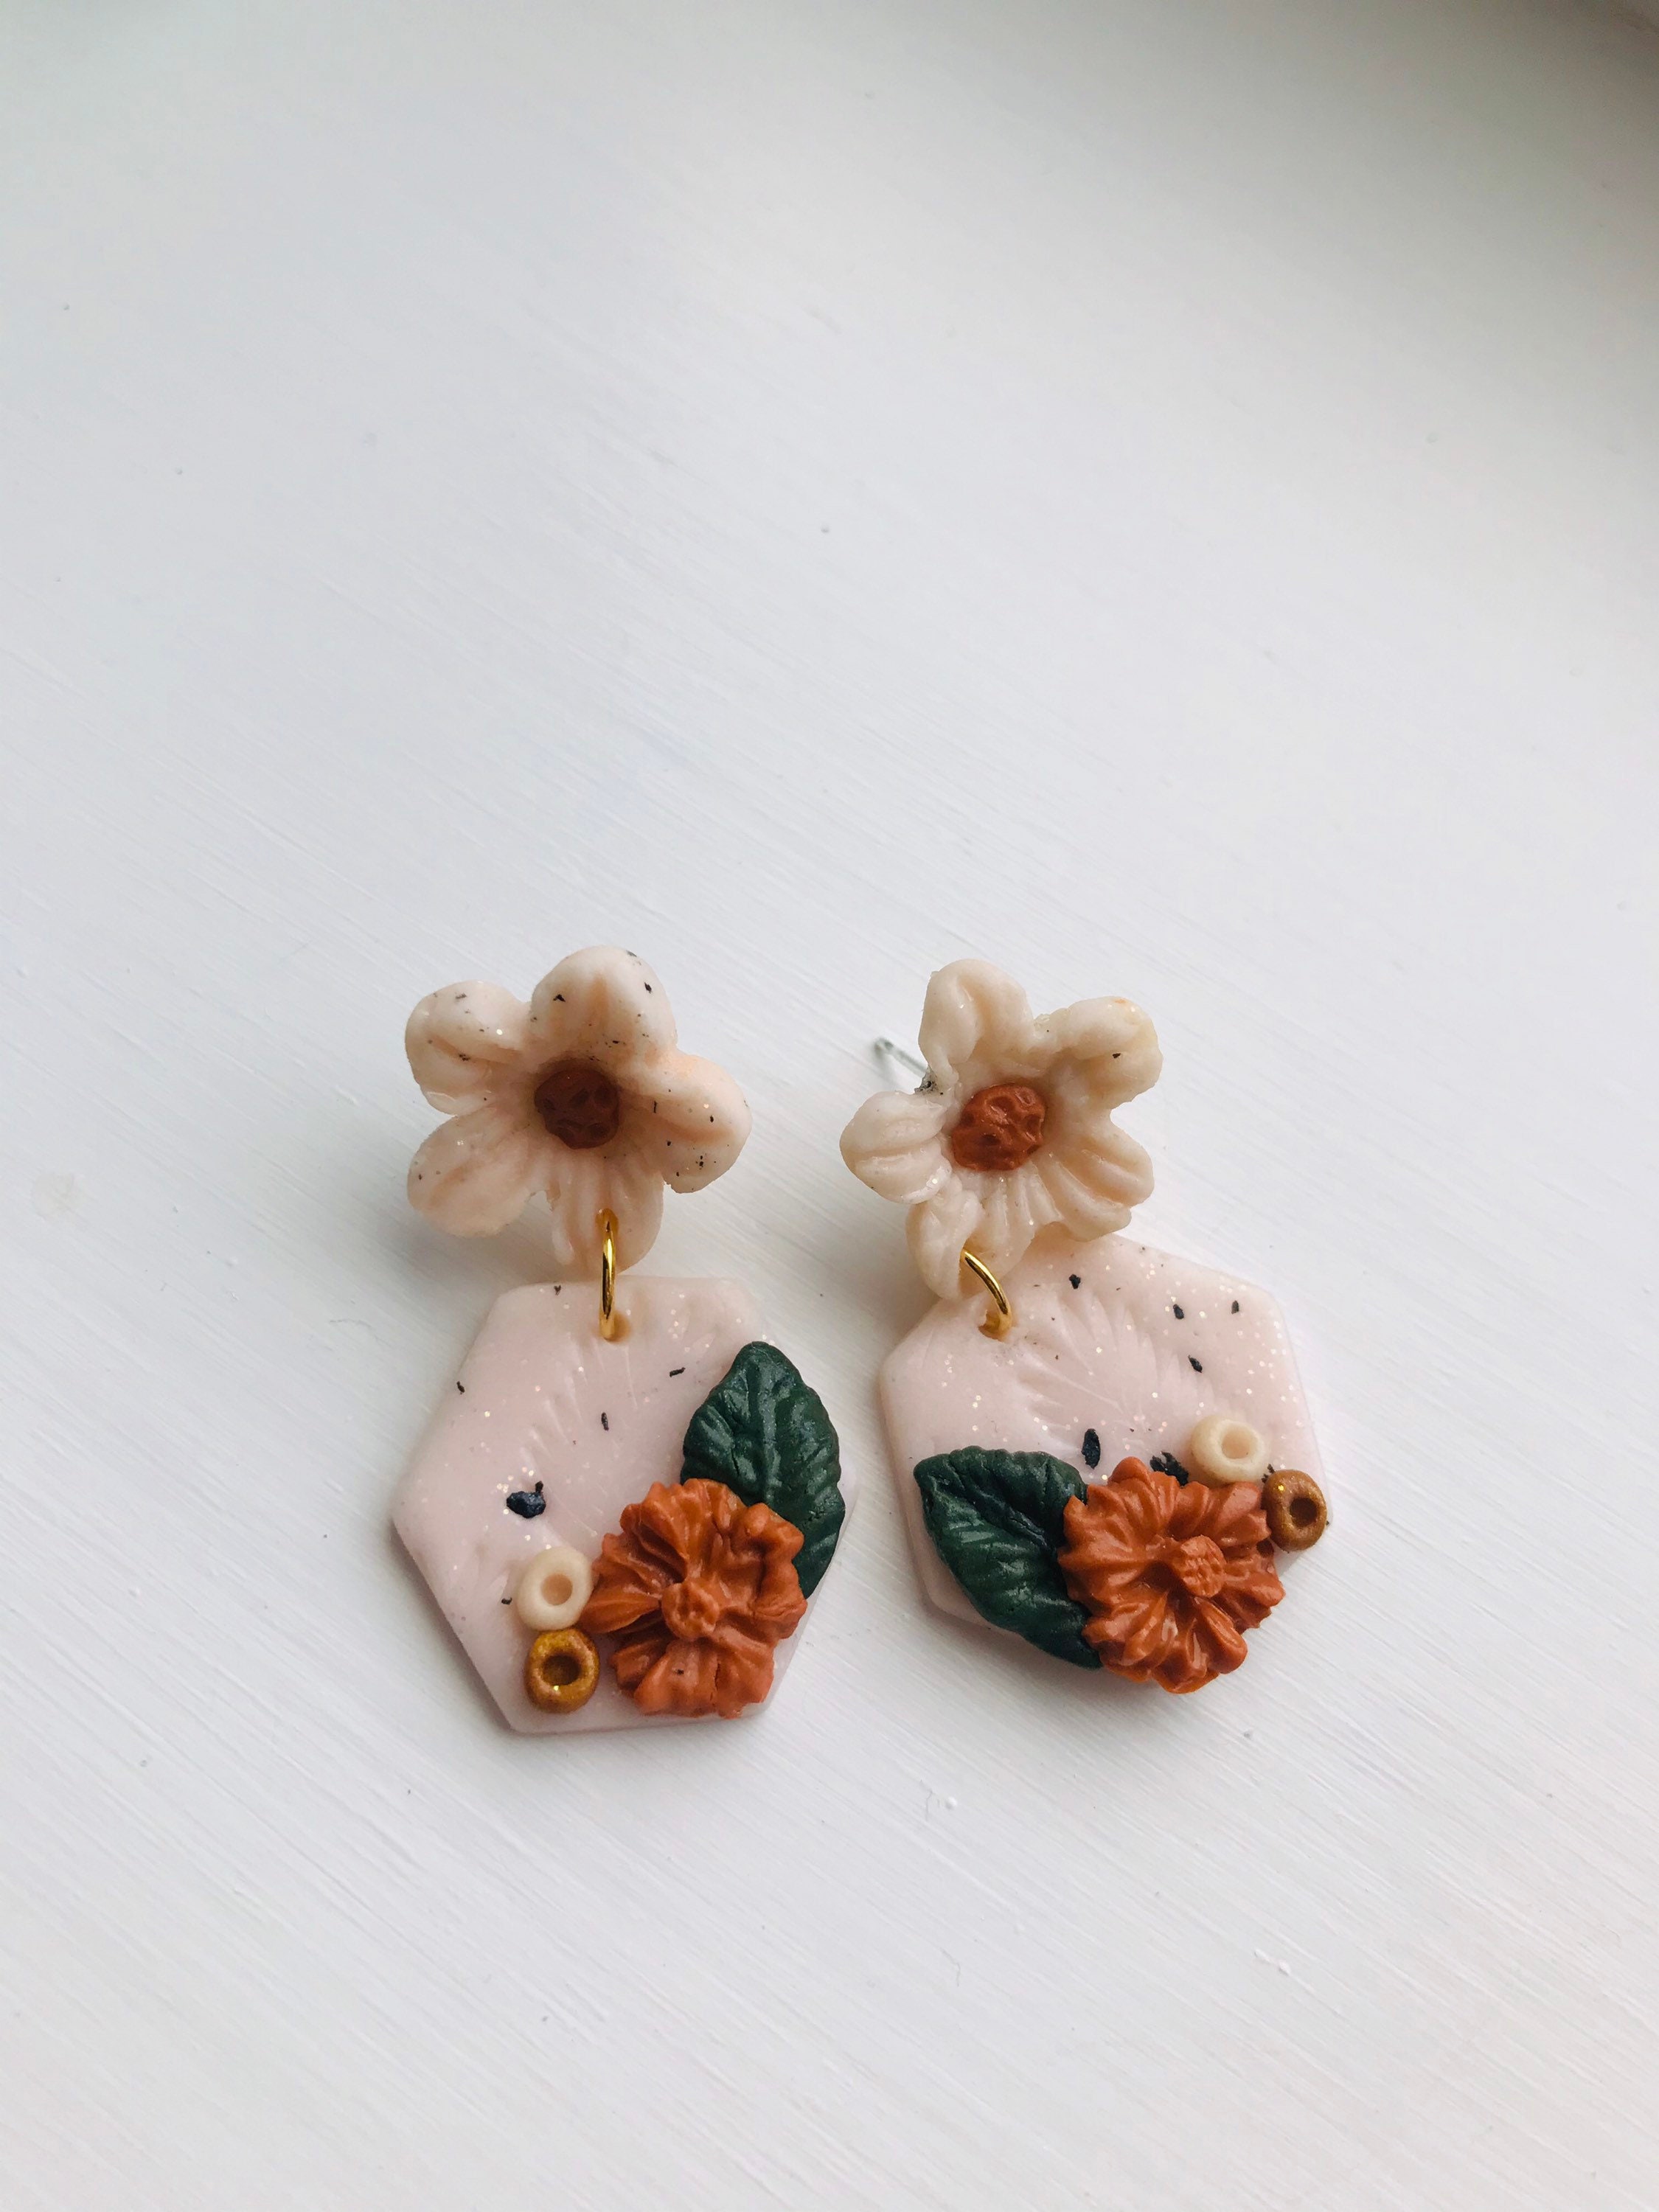 Handmade Statement Earrings from Polymer Clay / FIMO - Luloveshandmade